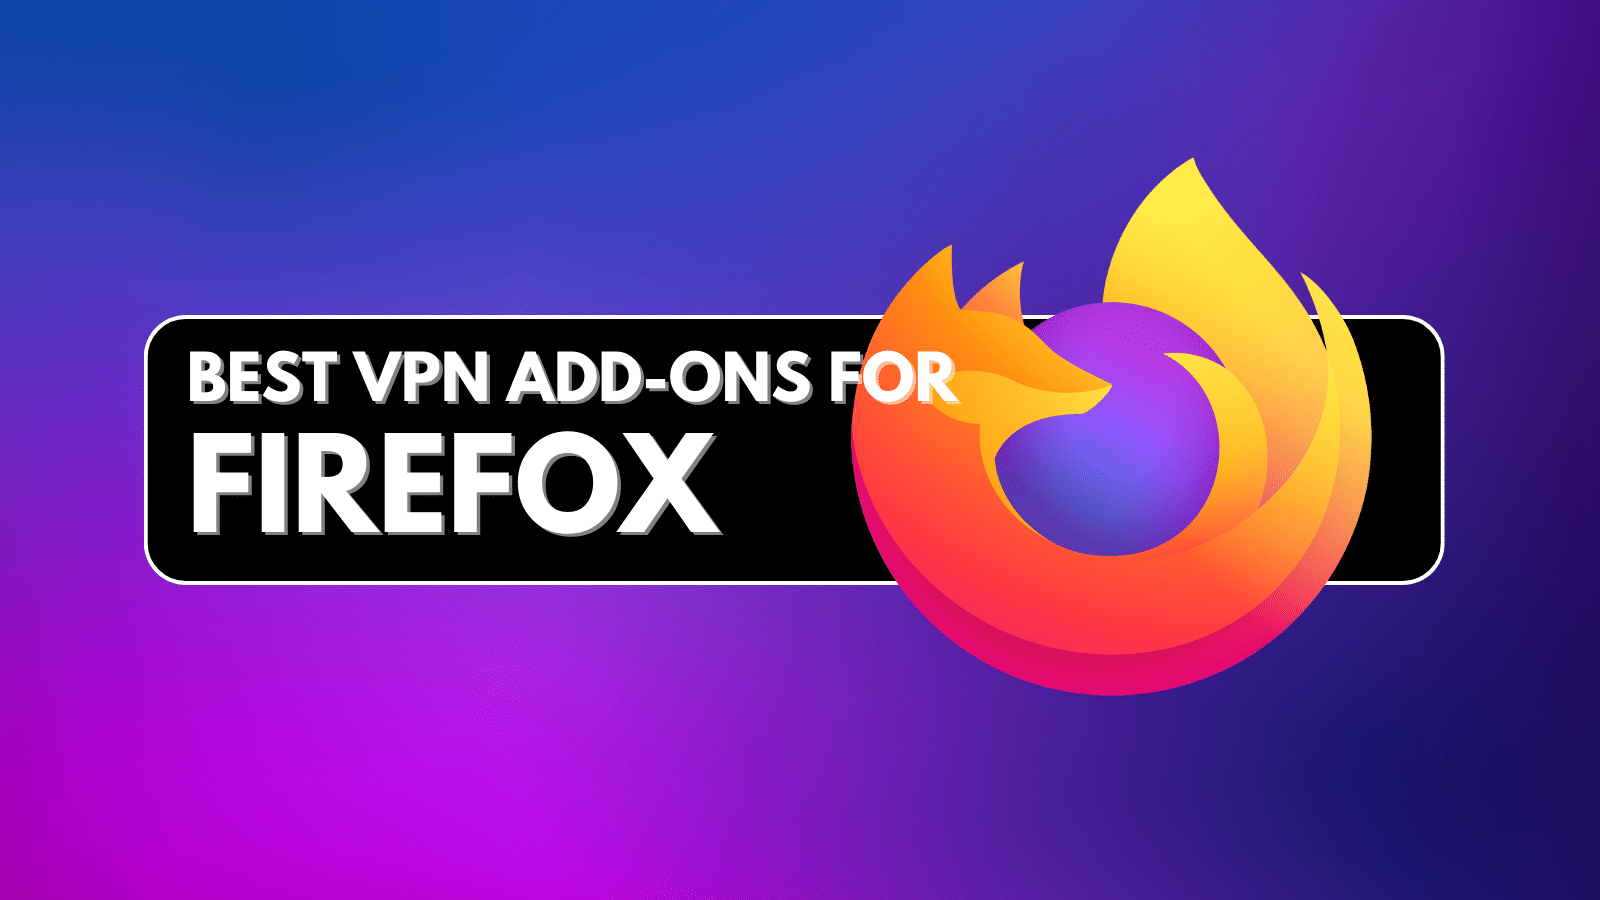 The 17 Best Mozilla Firefox Add-ons & Extensions thumbnail